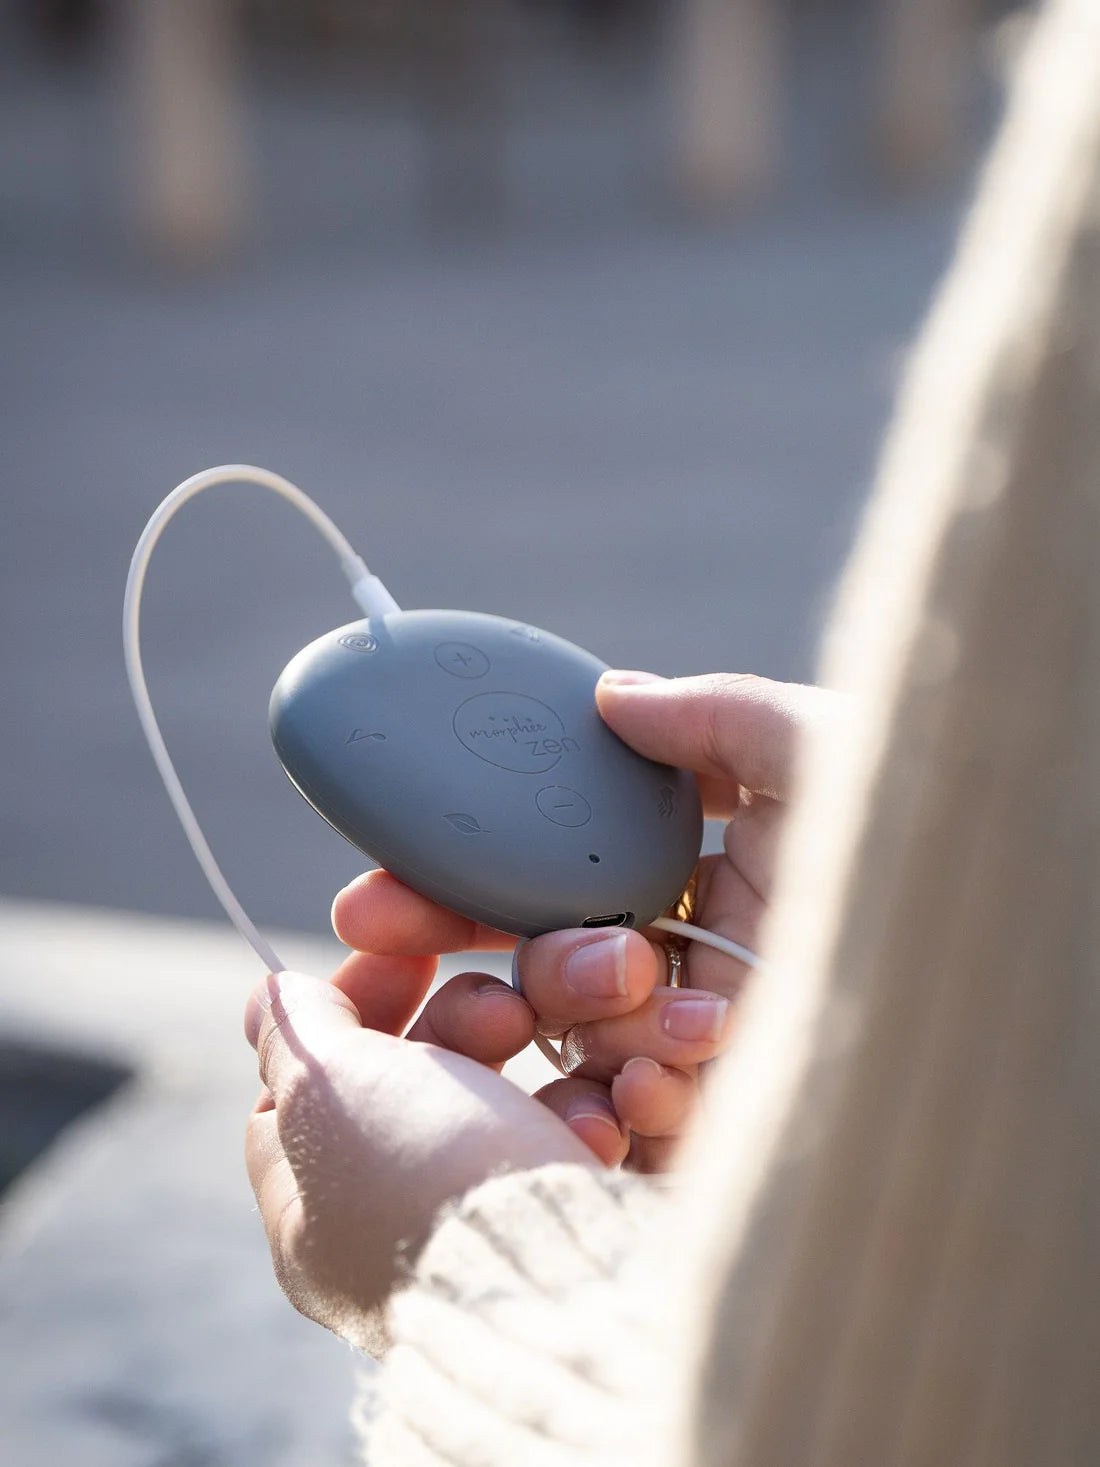 The Portable Pebble for Anxiety and Stress Management - Morphée Zen